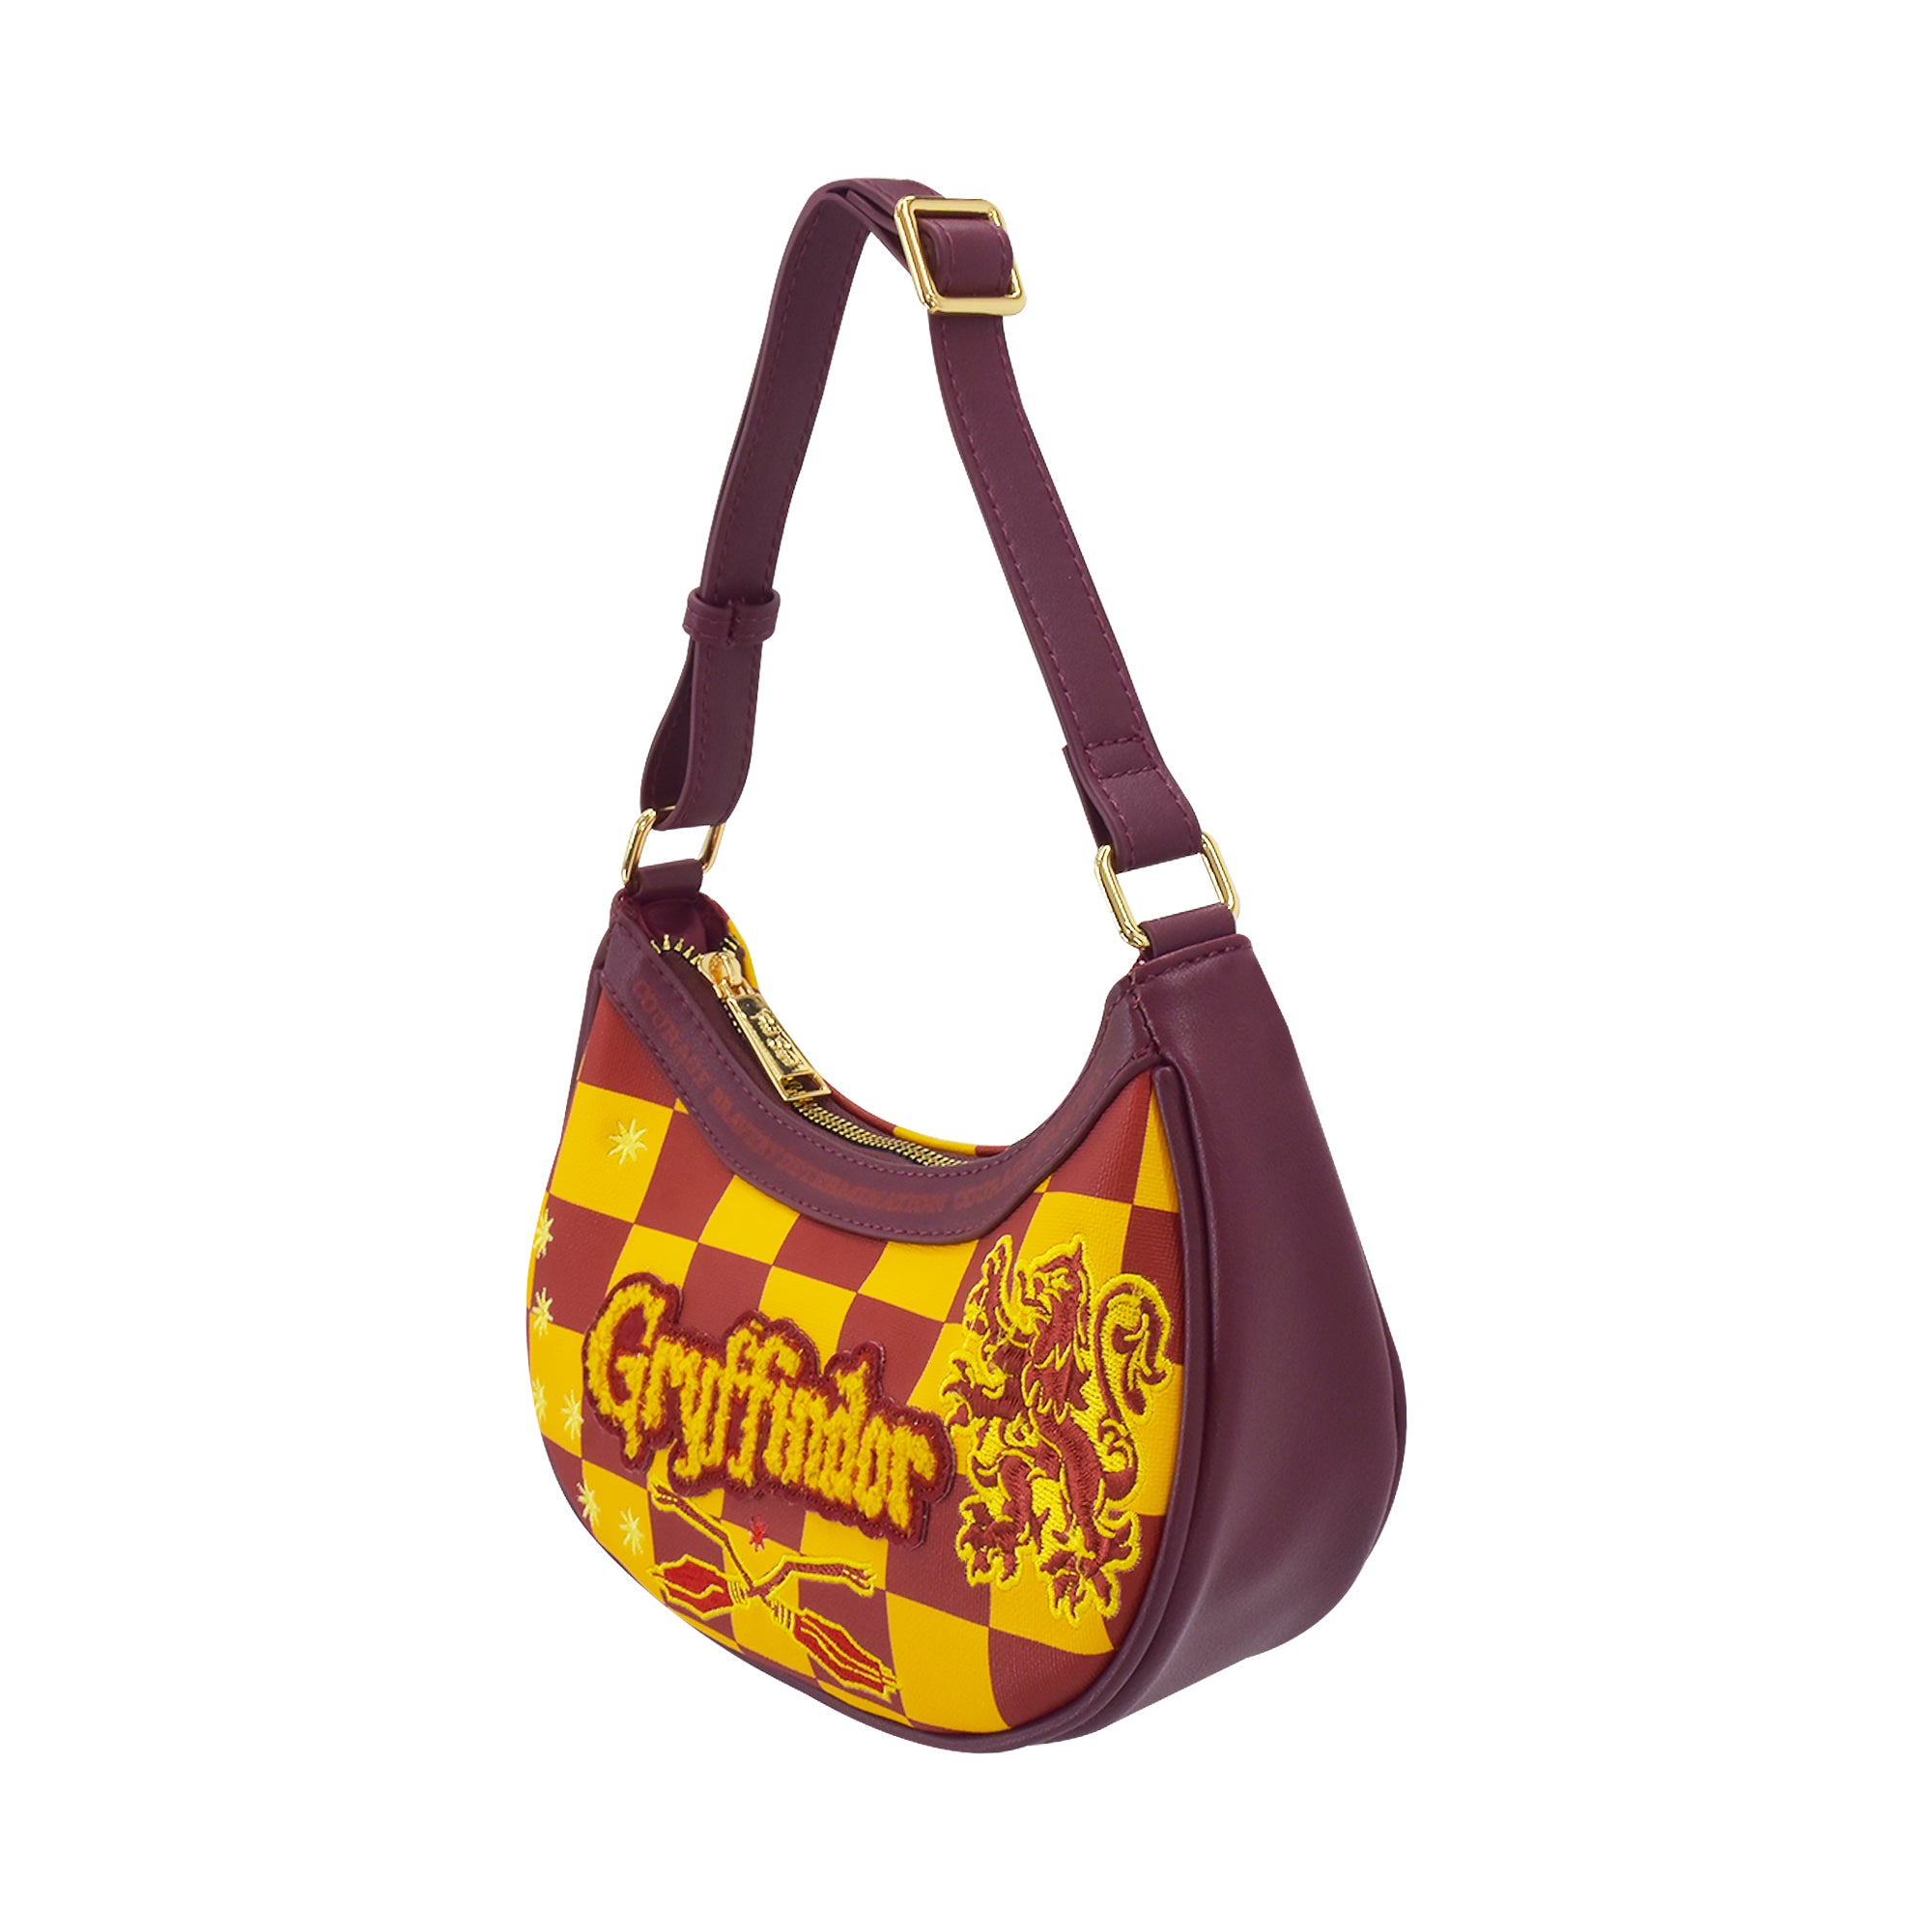 Fred Segal - Harry Potter Quidditch House Gryffindor Crossbody